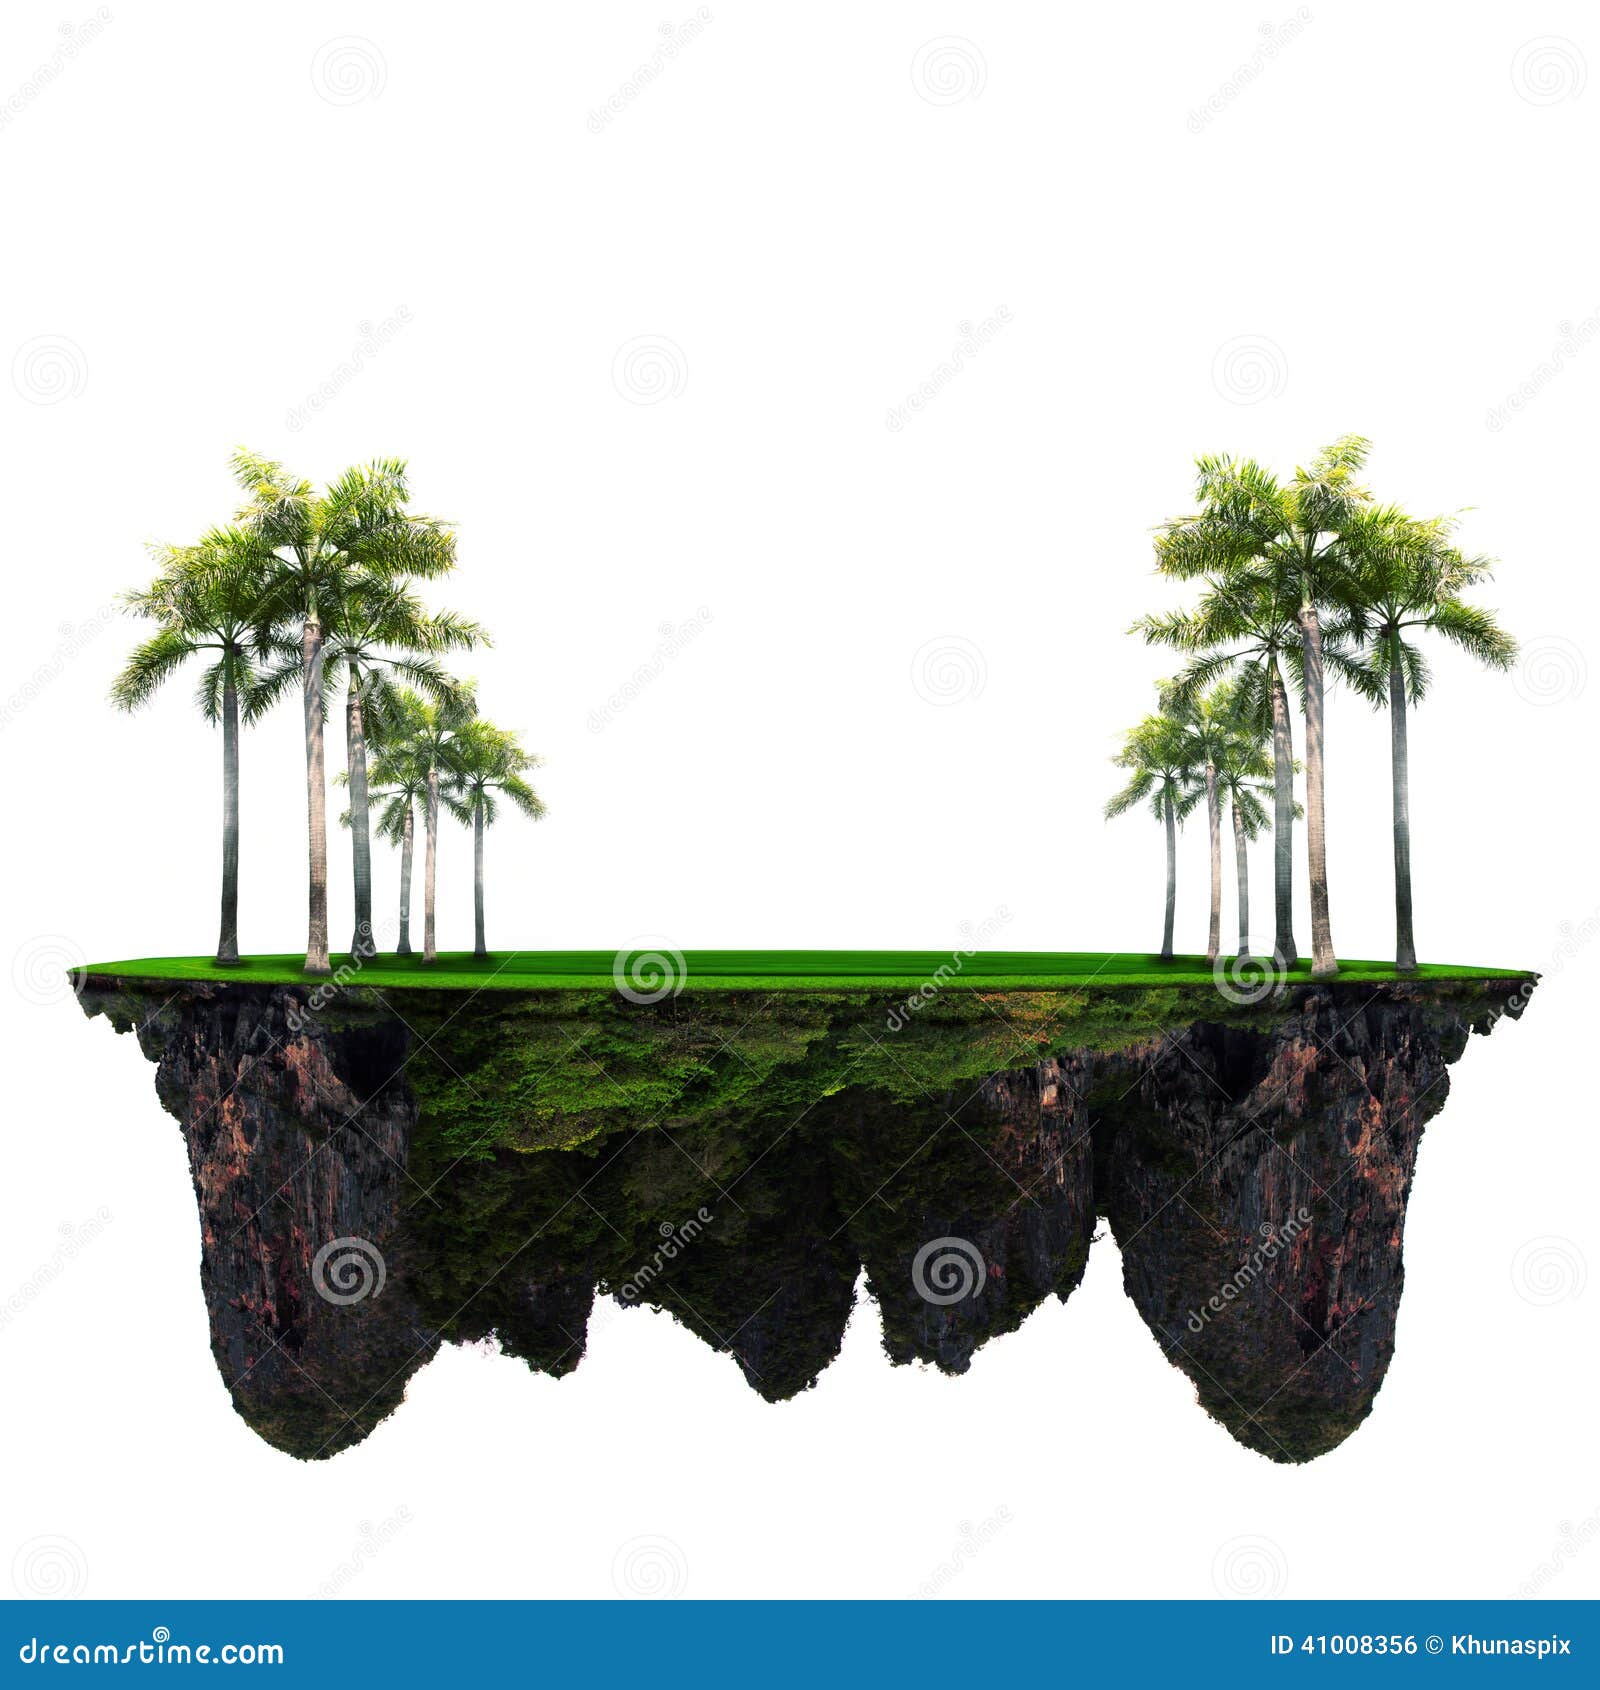 floating island with green plam tree and grass field